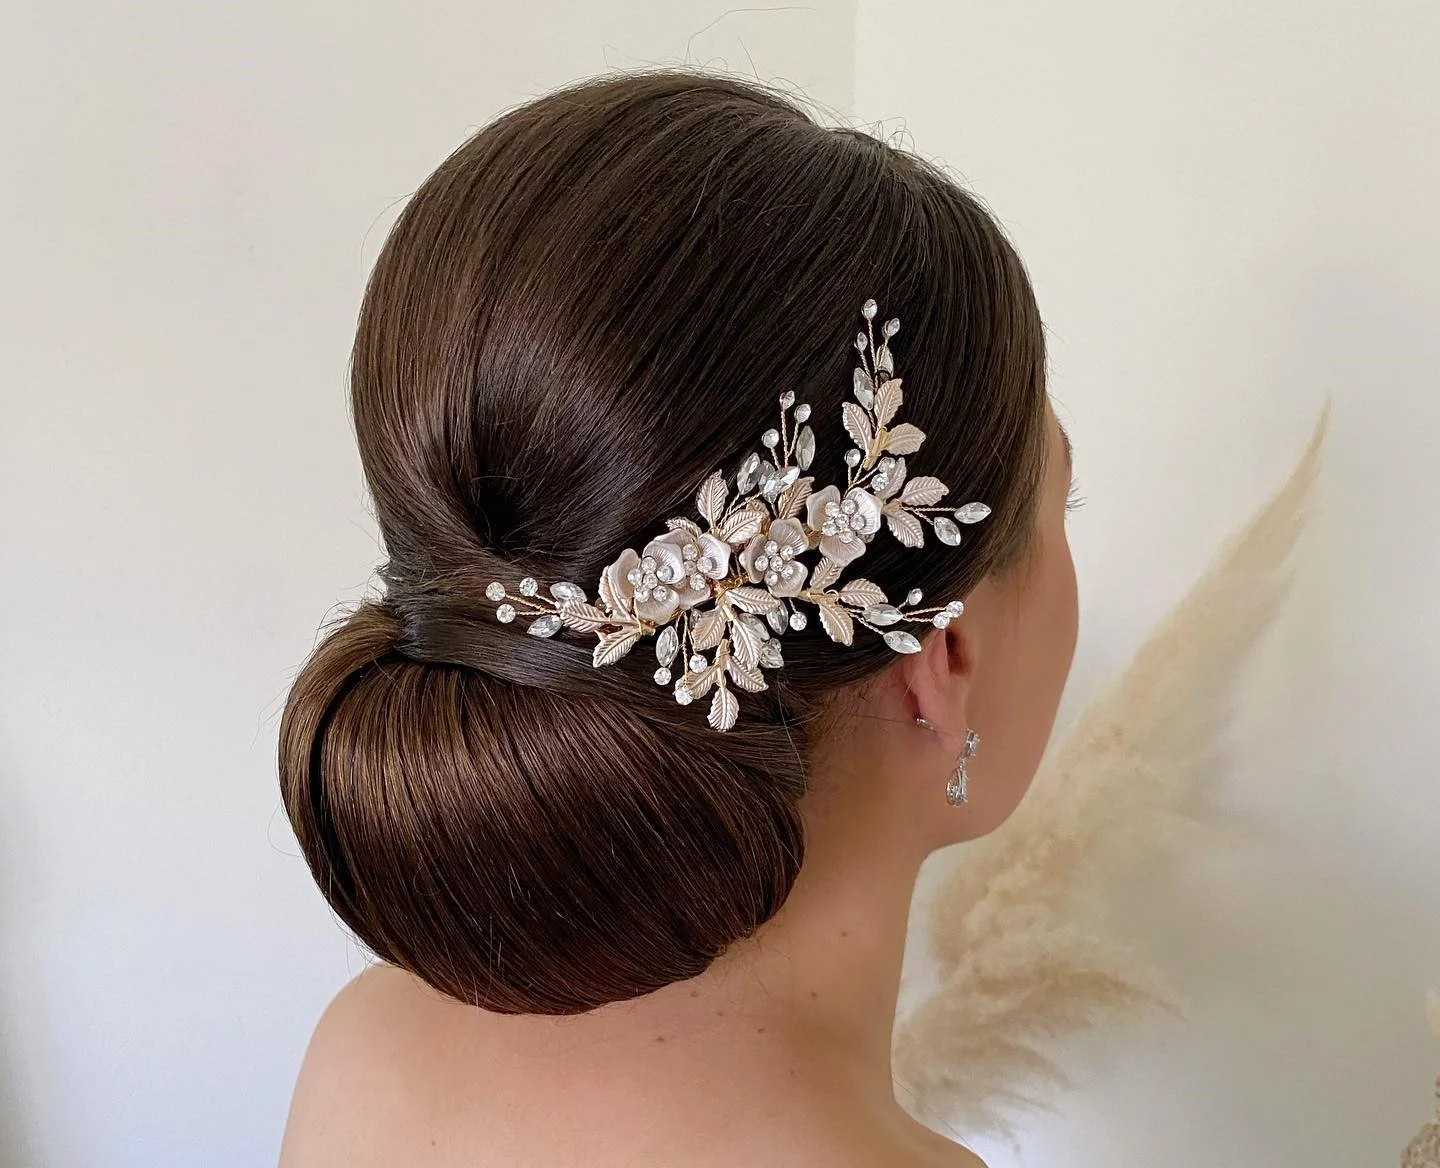 Best-wedding-updo-hairstyles-low-bun-pearly-hairstylist